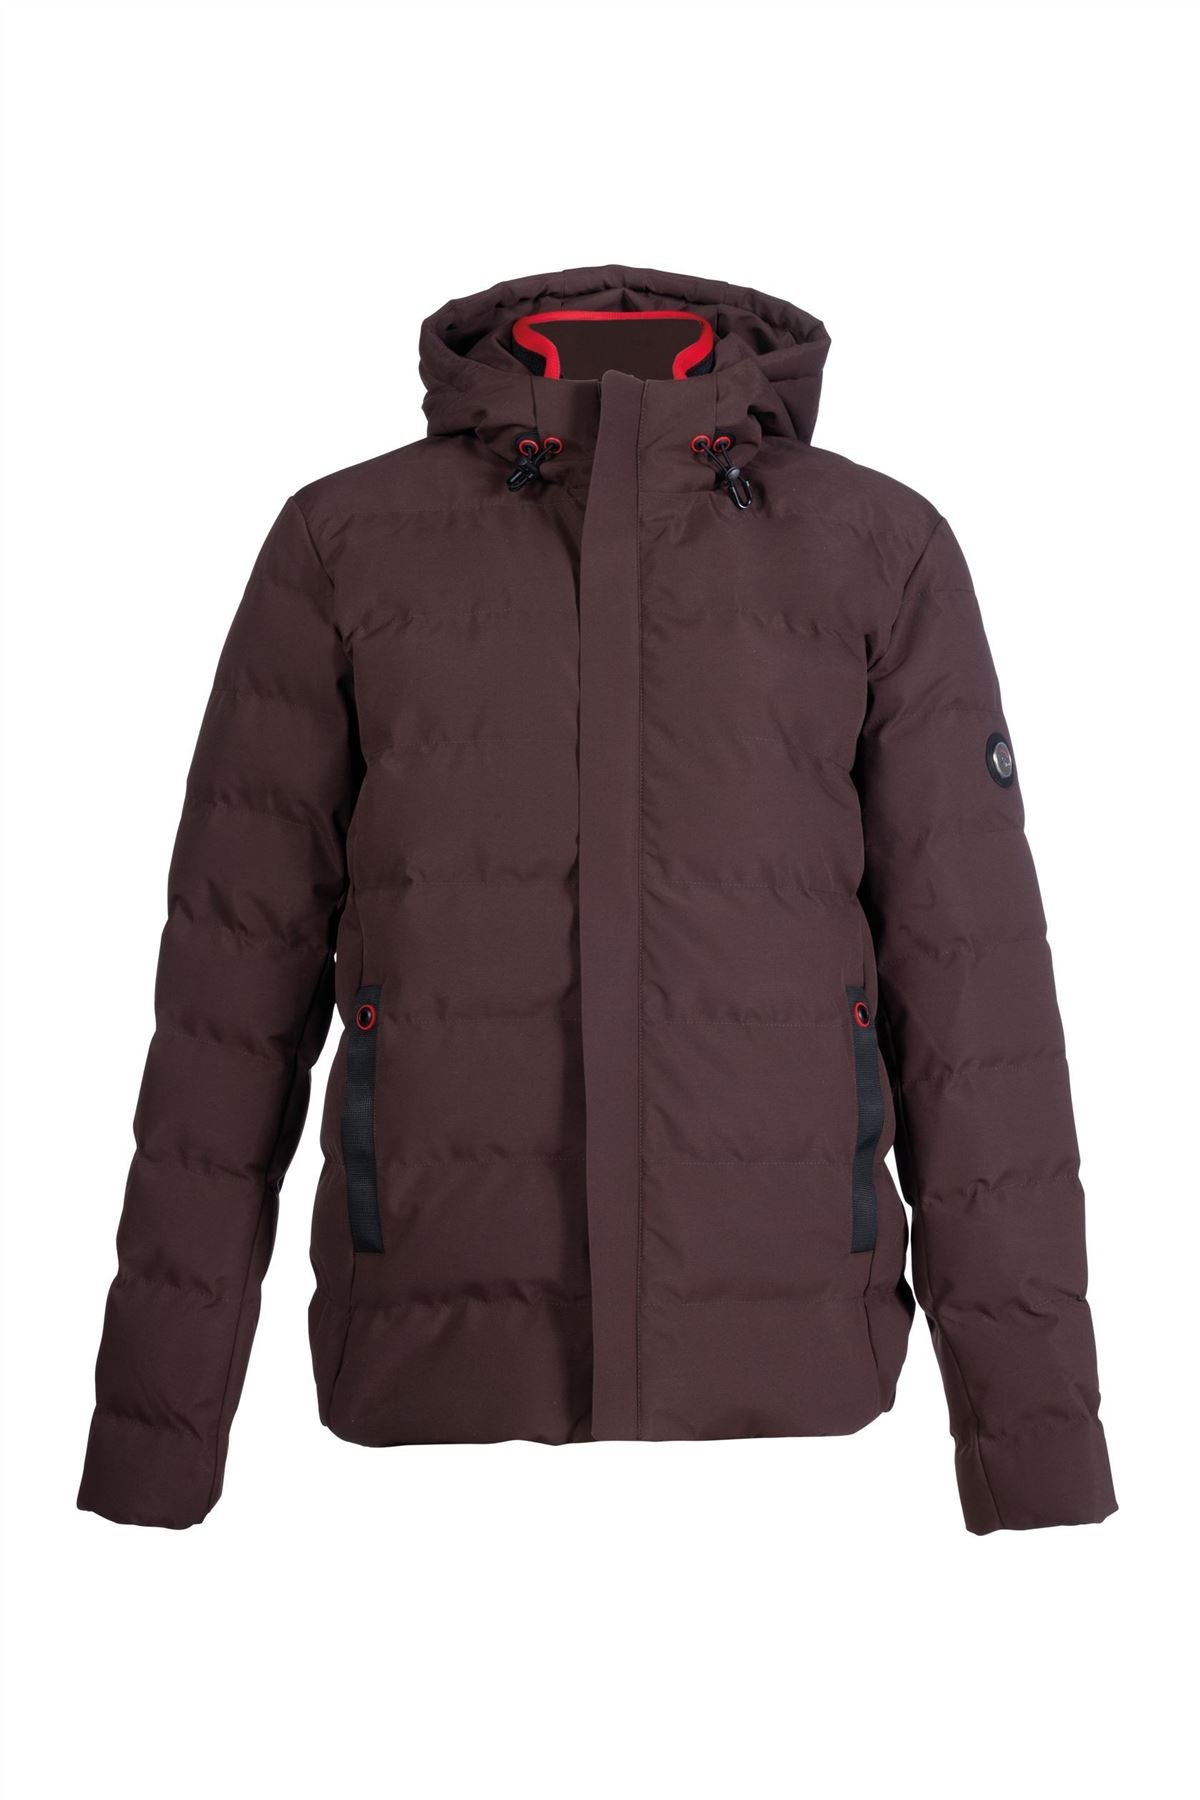 HKM Men'S Quilted Jacket Hamburg - Just Horse Riders